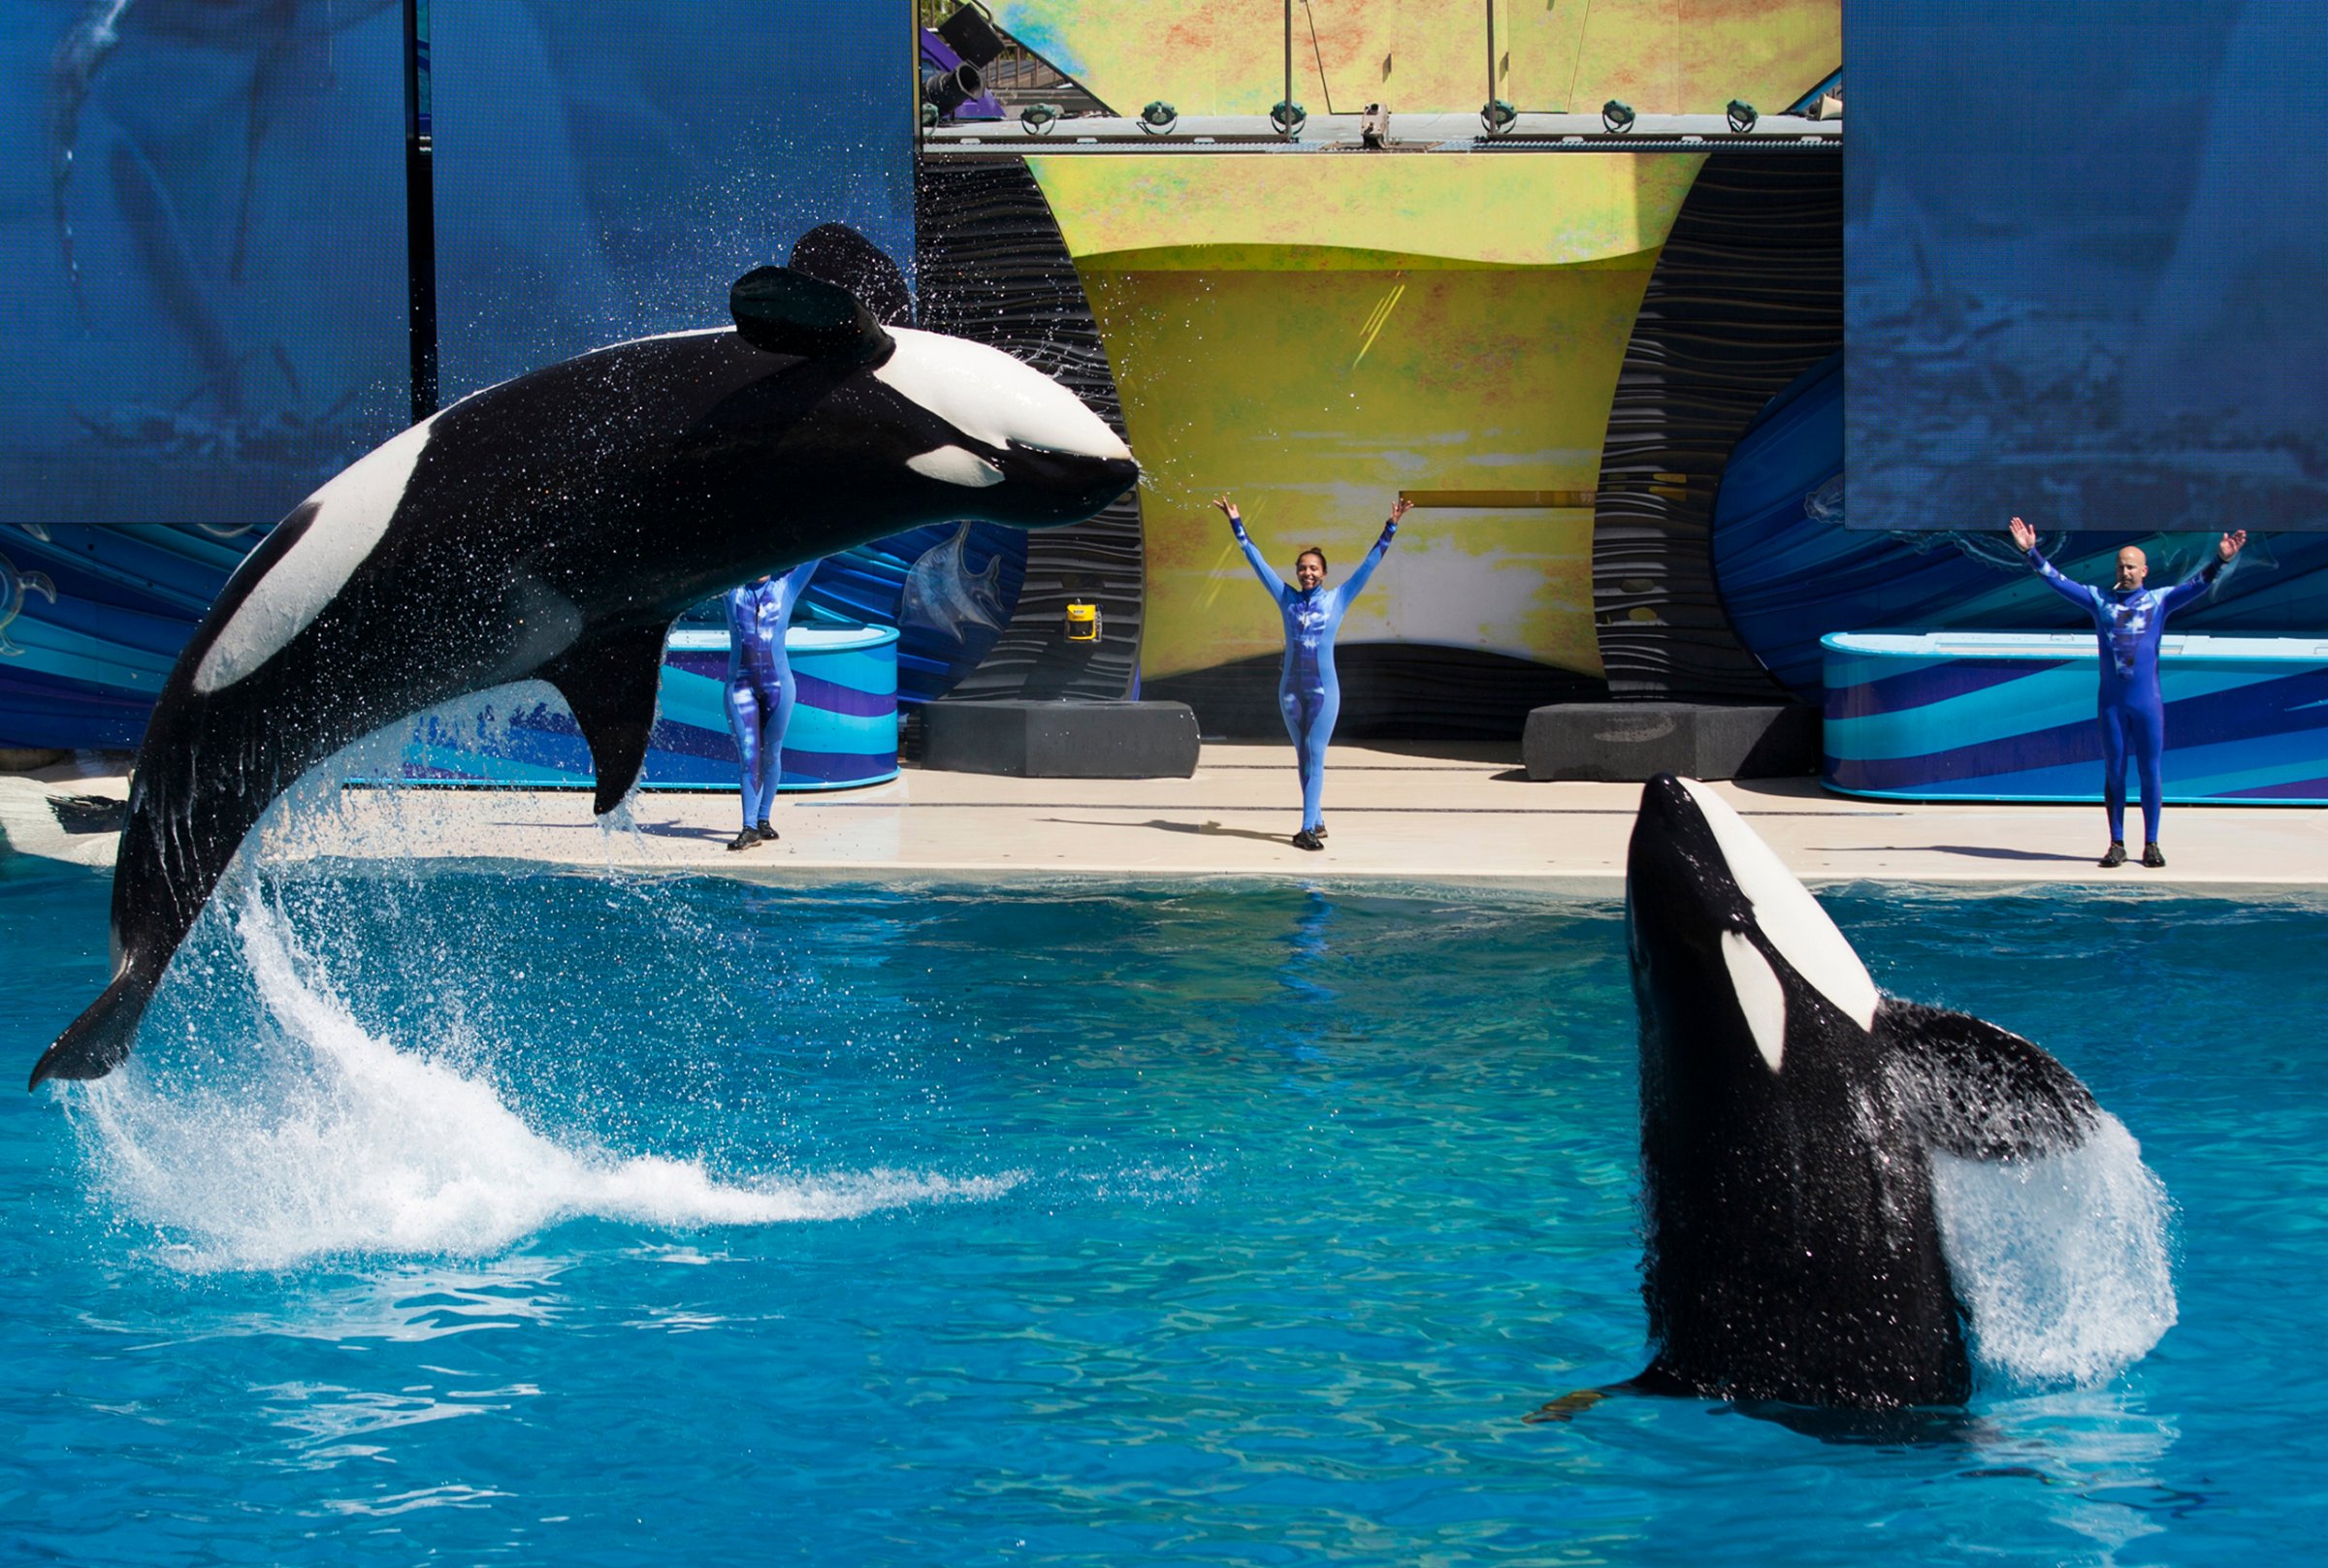 Trainers have killer whales perform for the crowd during a show at SeaWorld in San Diego, California, on March 19, 2014.